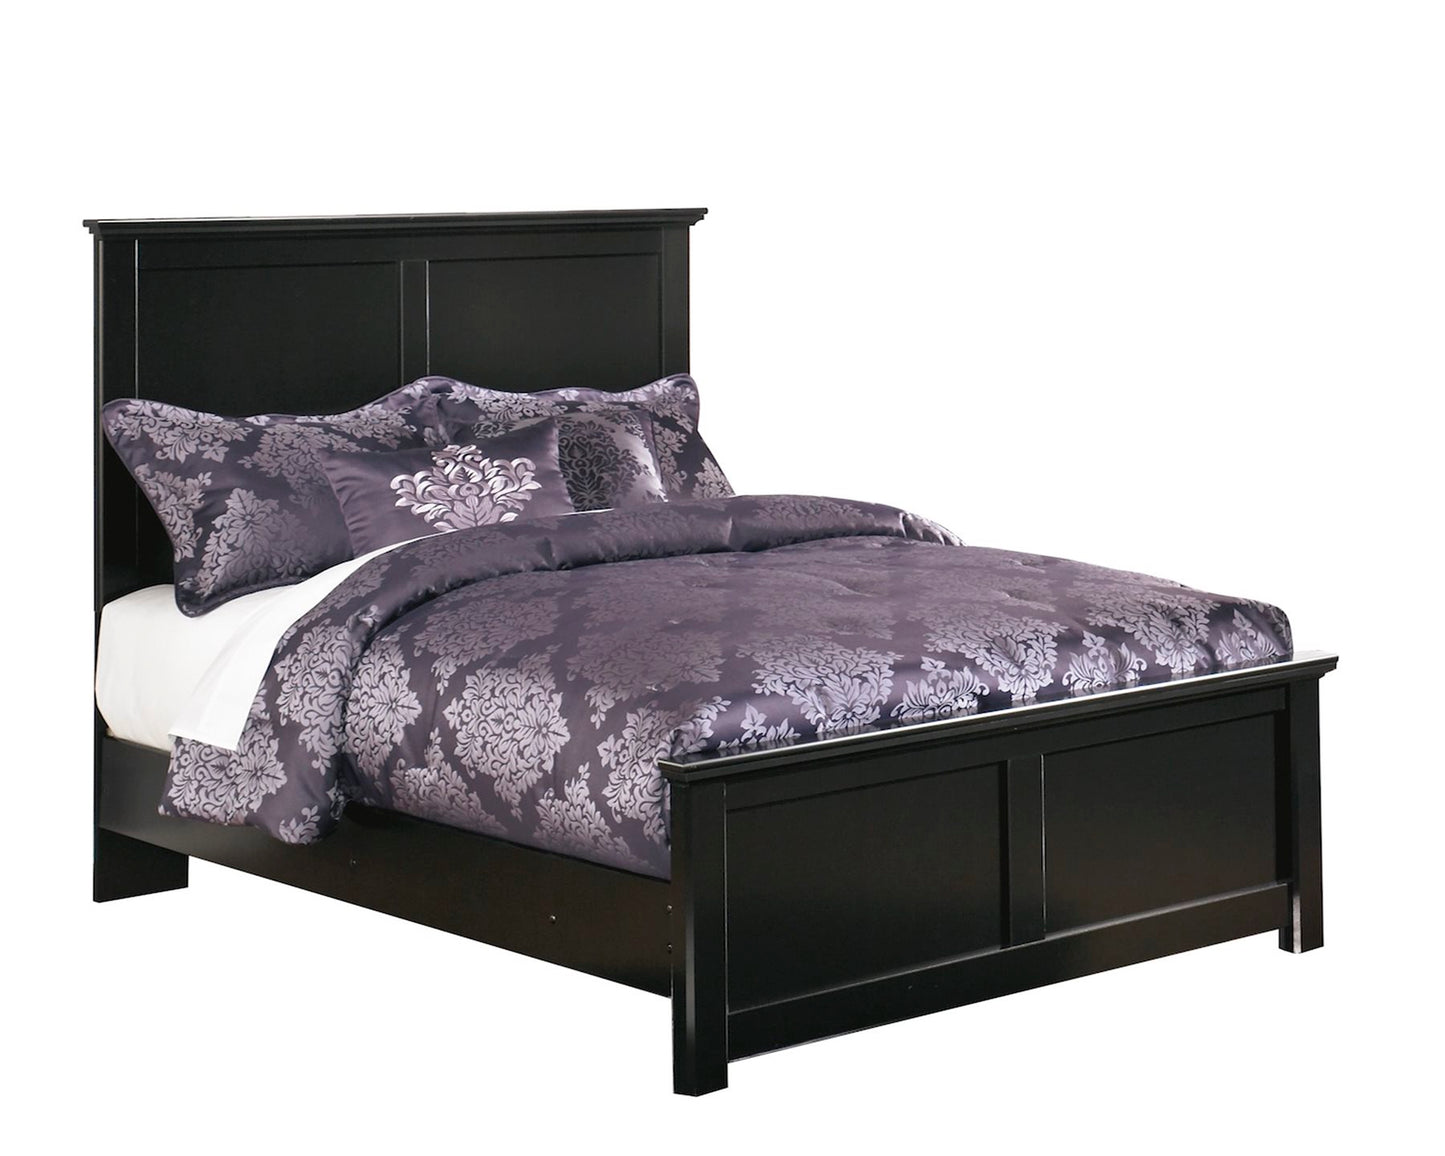 Ashley Maribel 6 PC Queen Panel Bedroom Set with Two Nightstand & Chest in Black - The Furniture Space.